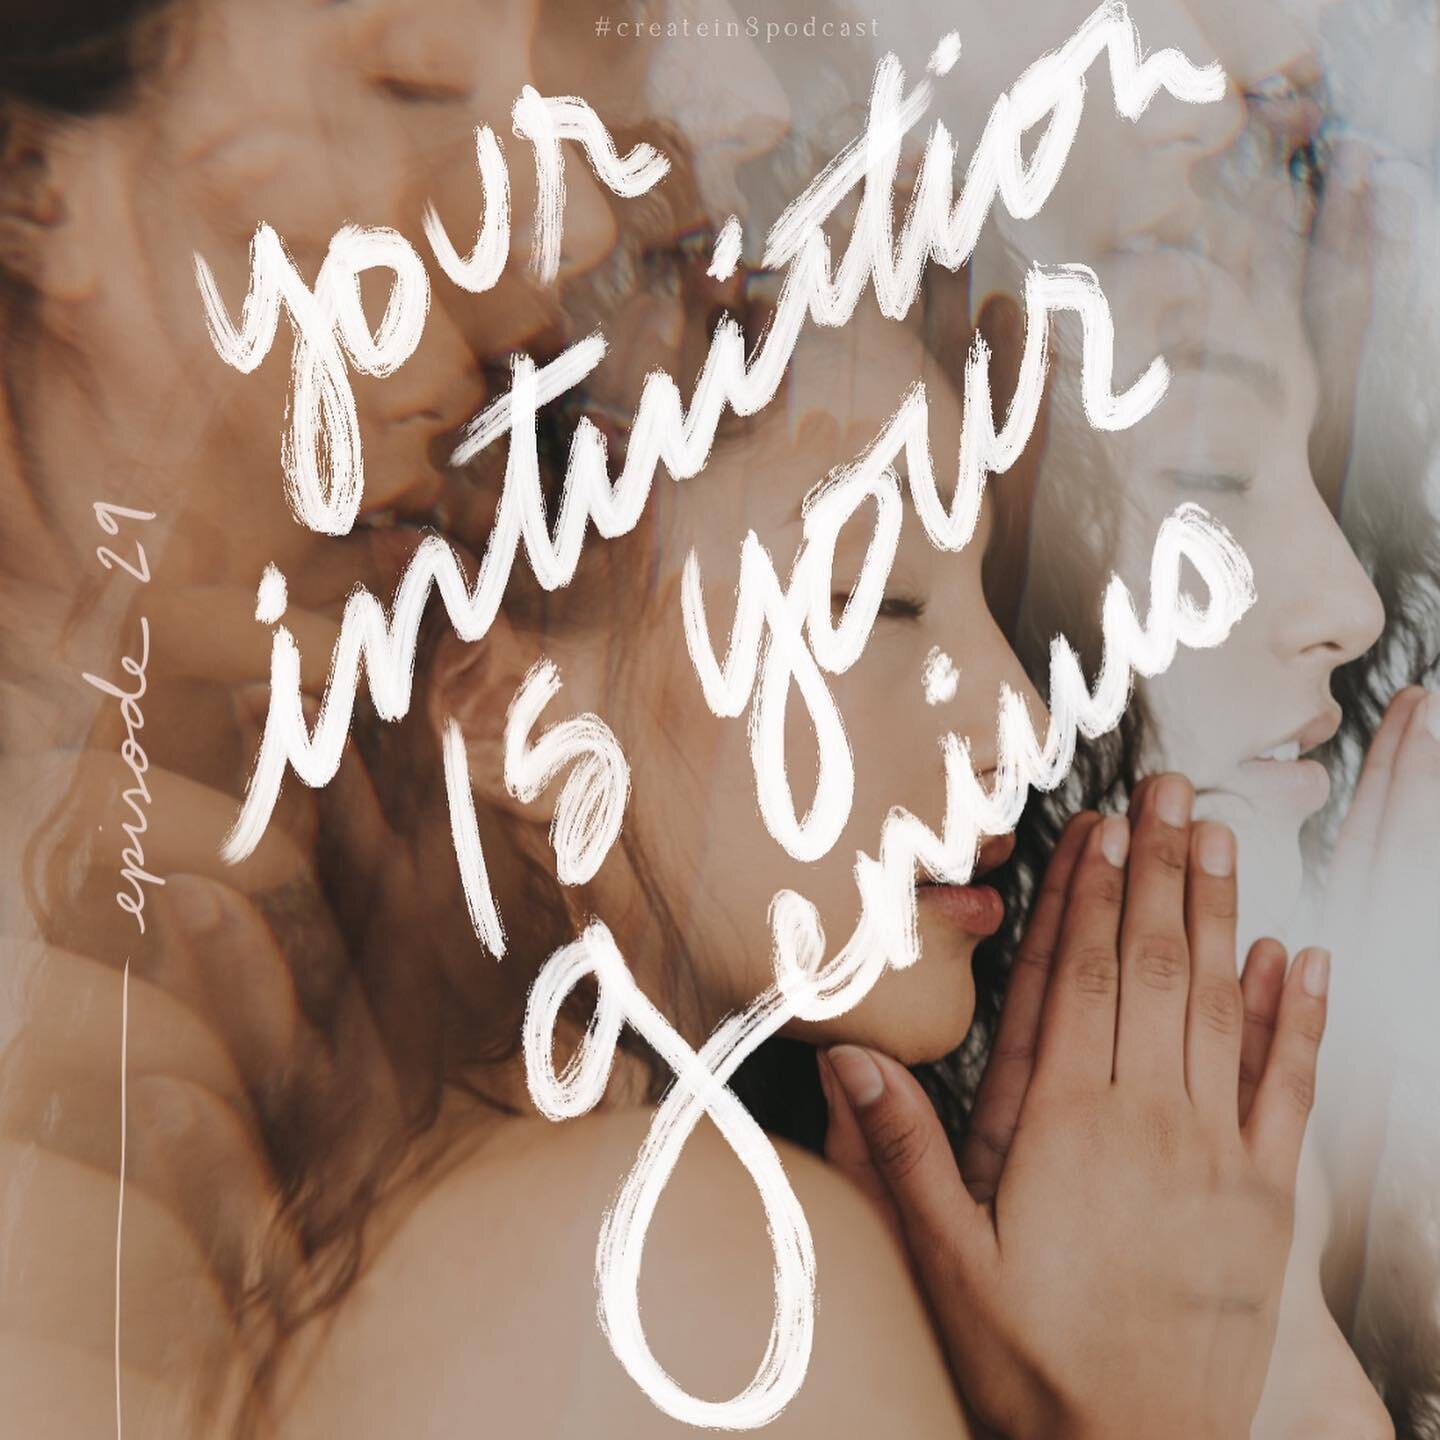 Your intuition is your genius. It&rsquo;s your connection to yourself. It knows your unique artistic signature.

Art (in any form) is a microcosm for us to familiarize ourselves with how ours works. And helps us get to know how to listen.

Today&rsqu